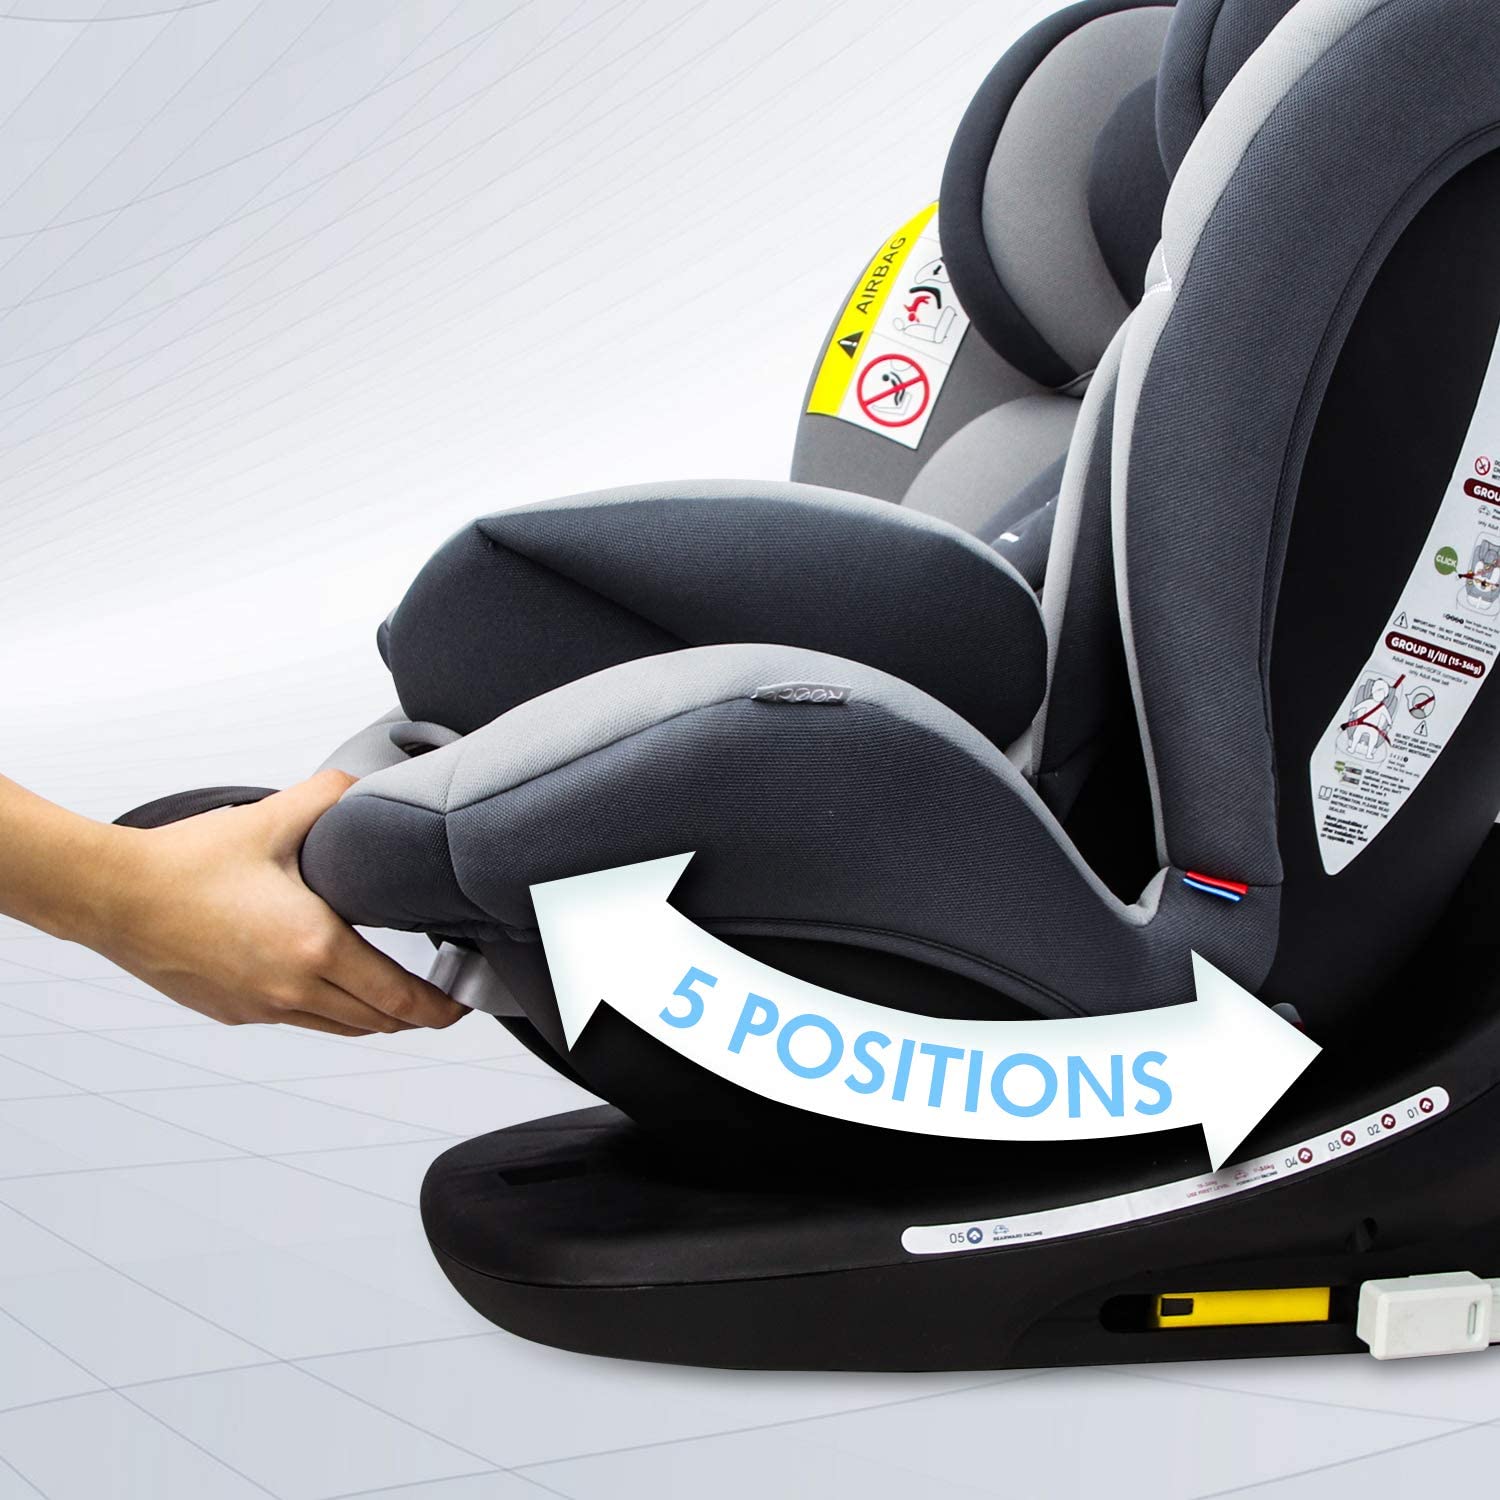 360° Baby Car Seat - with ISOFIX, Group 0+1/2/3 (0-36 kg), Approx. 0-12 Years